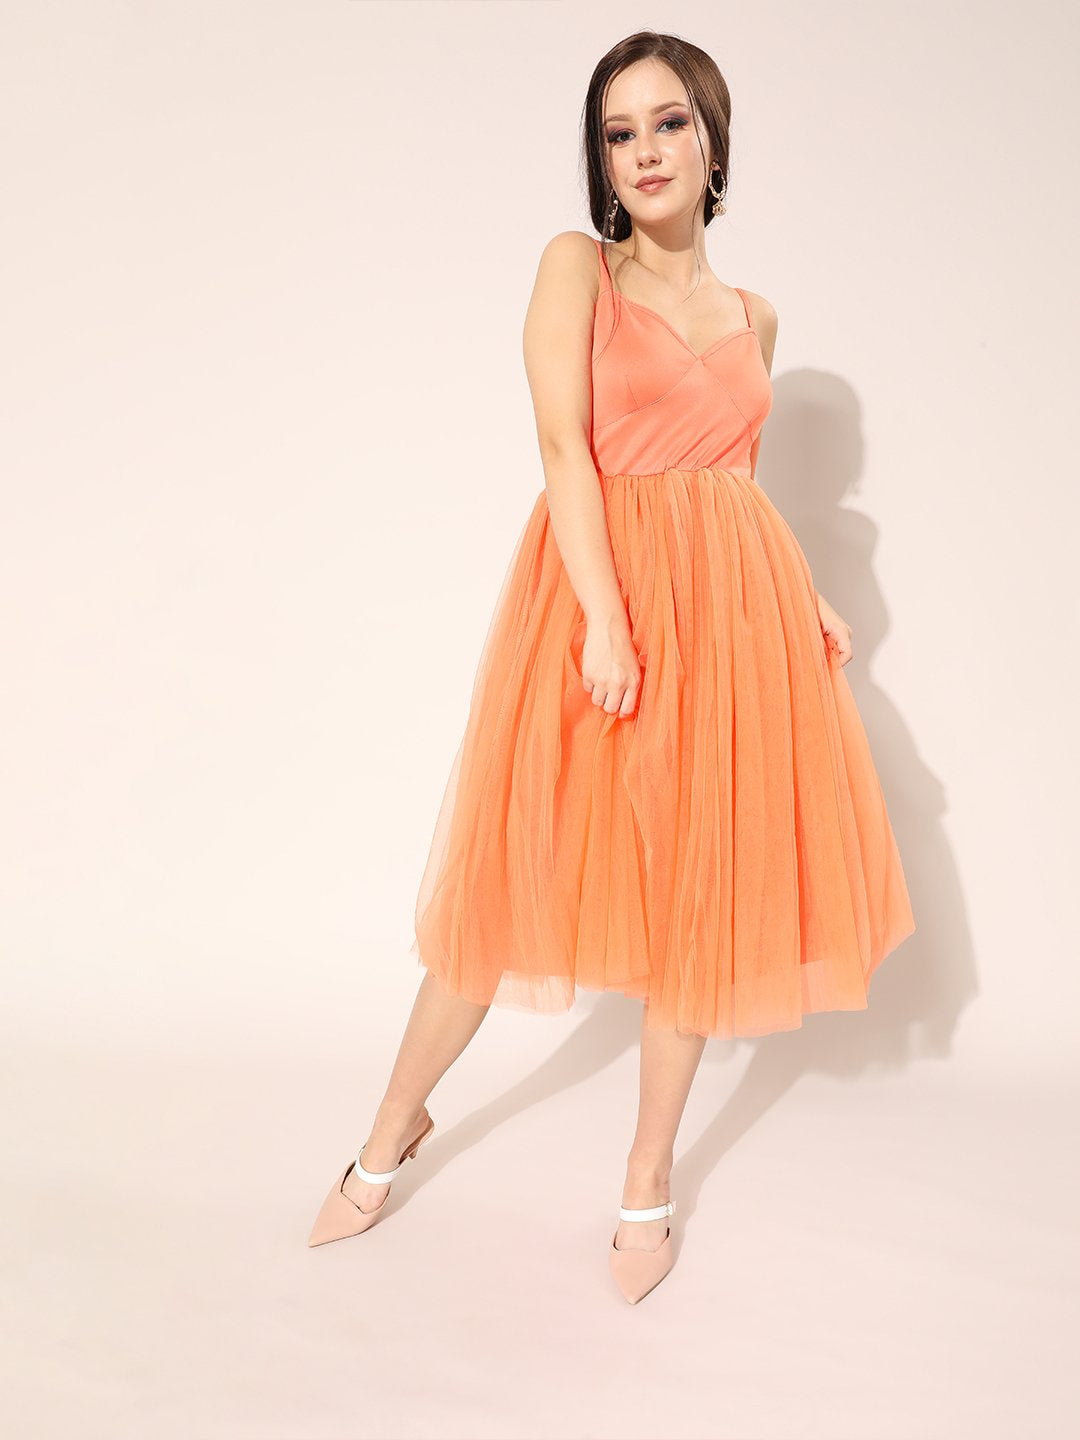 SCORPIUS Coral Tulle Dress